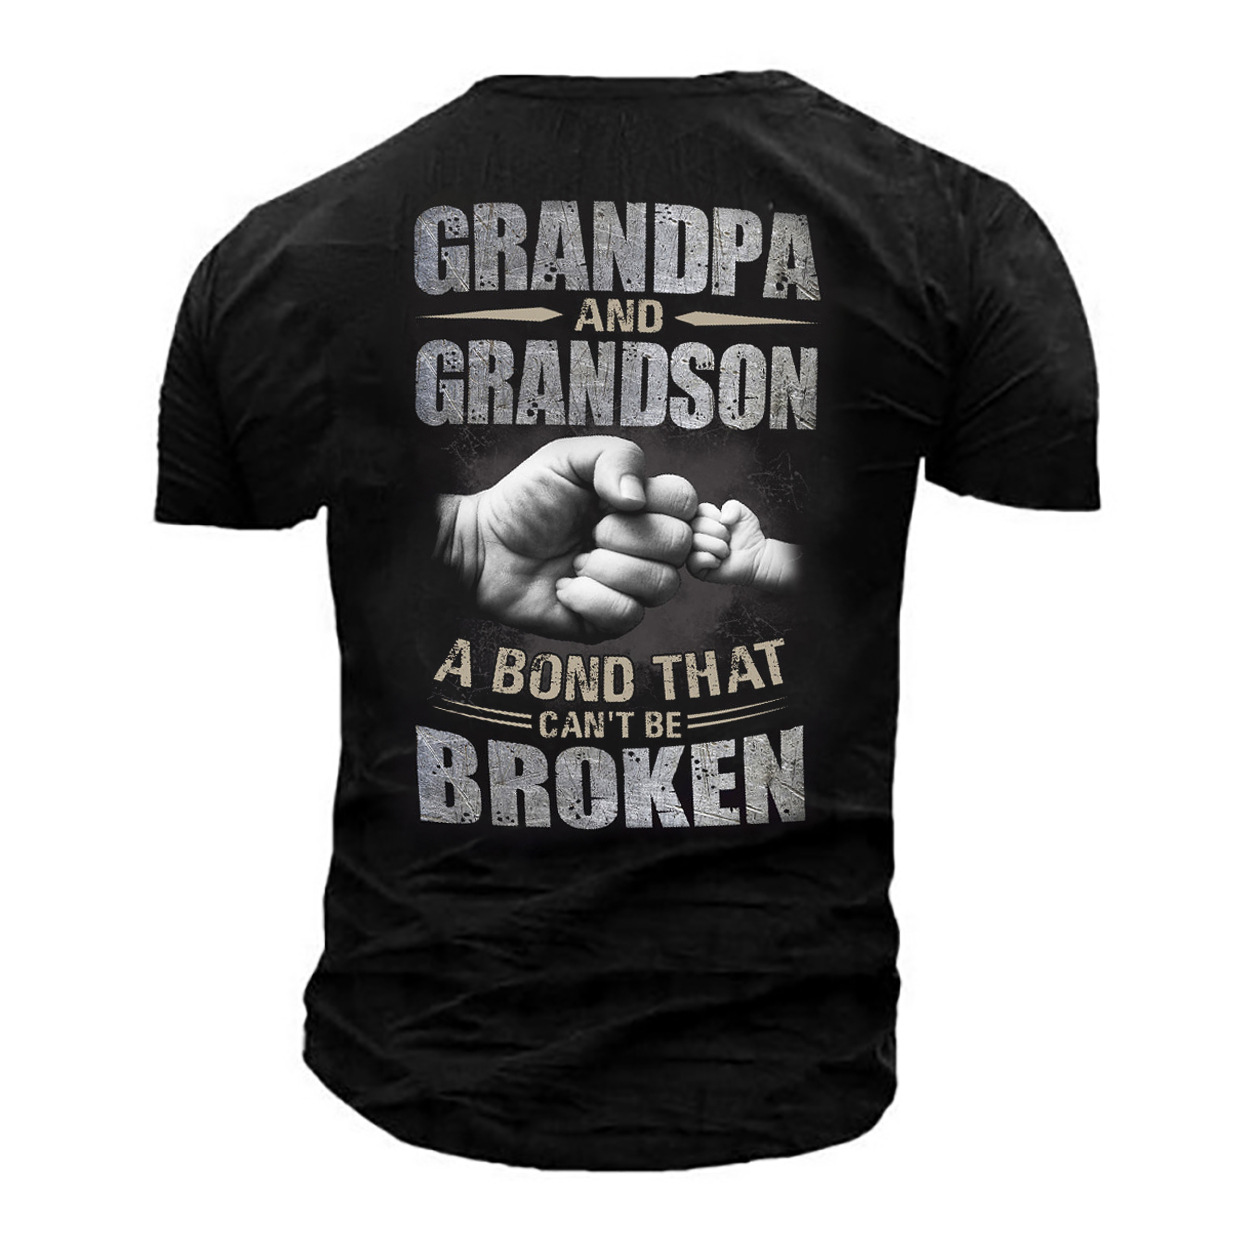 Men's Outdoor Grandpa And Chic Grandson Printed Cotton T-shirt